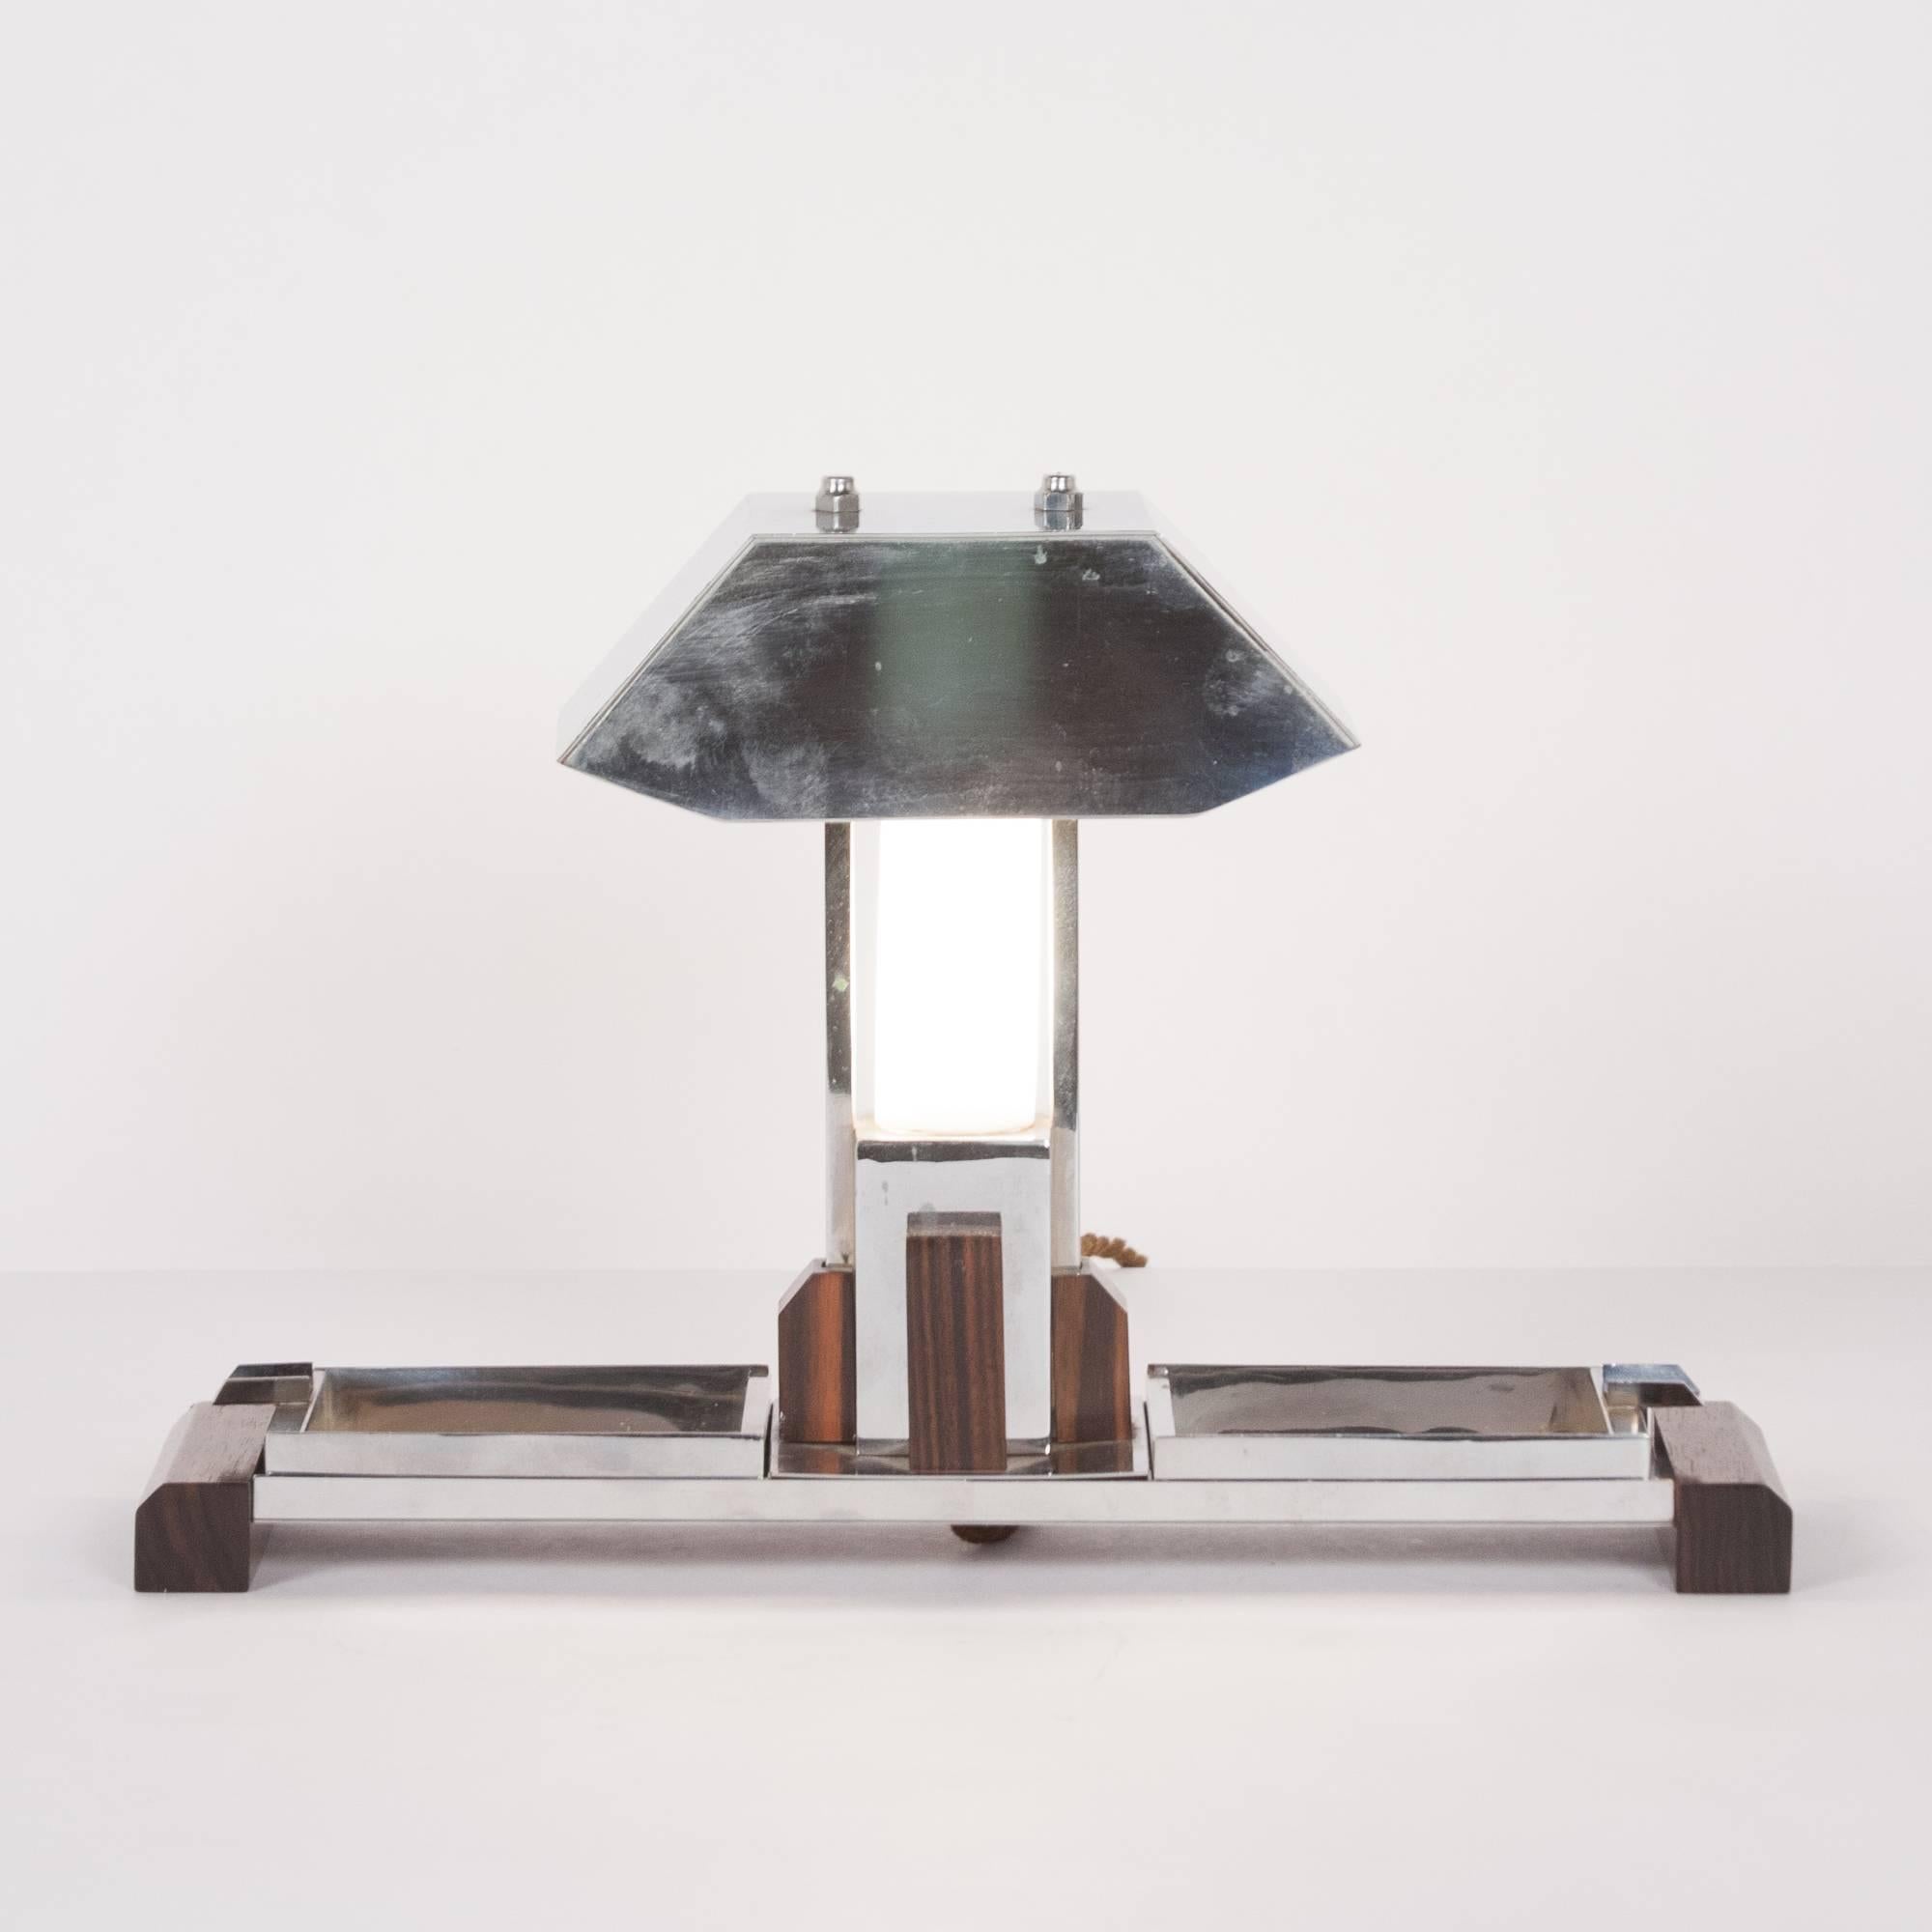 Nickel and Palissandre Desk Lamp, French, 1930s For Sale 2